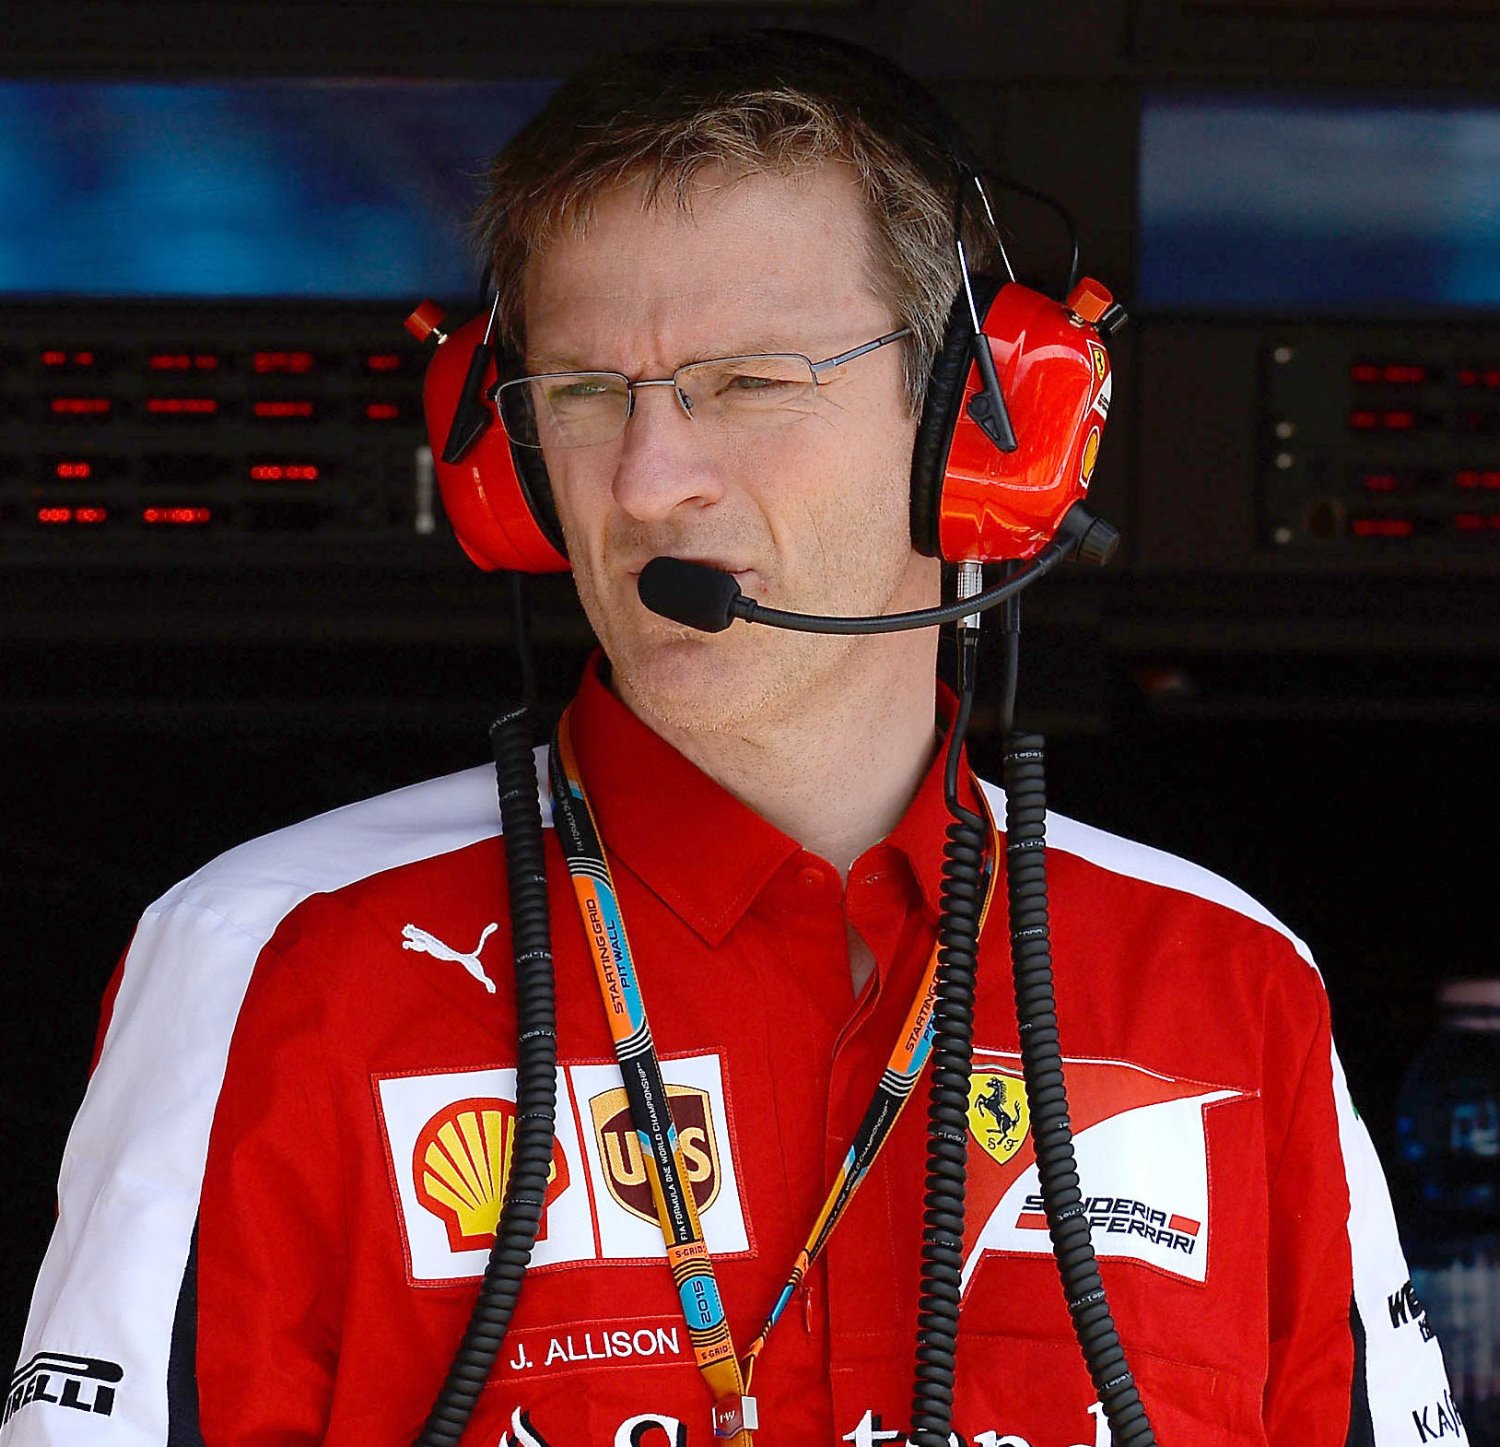 We will see James Allison's latest Ferrari one way or the other